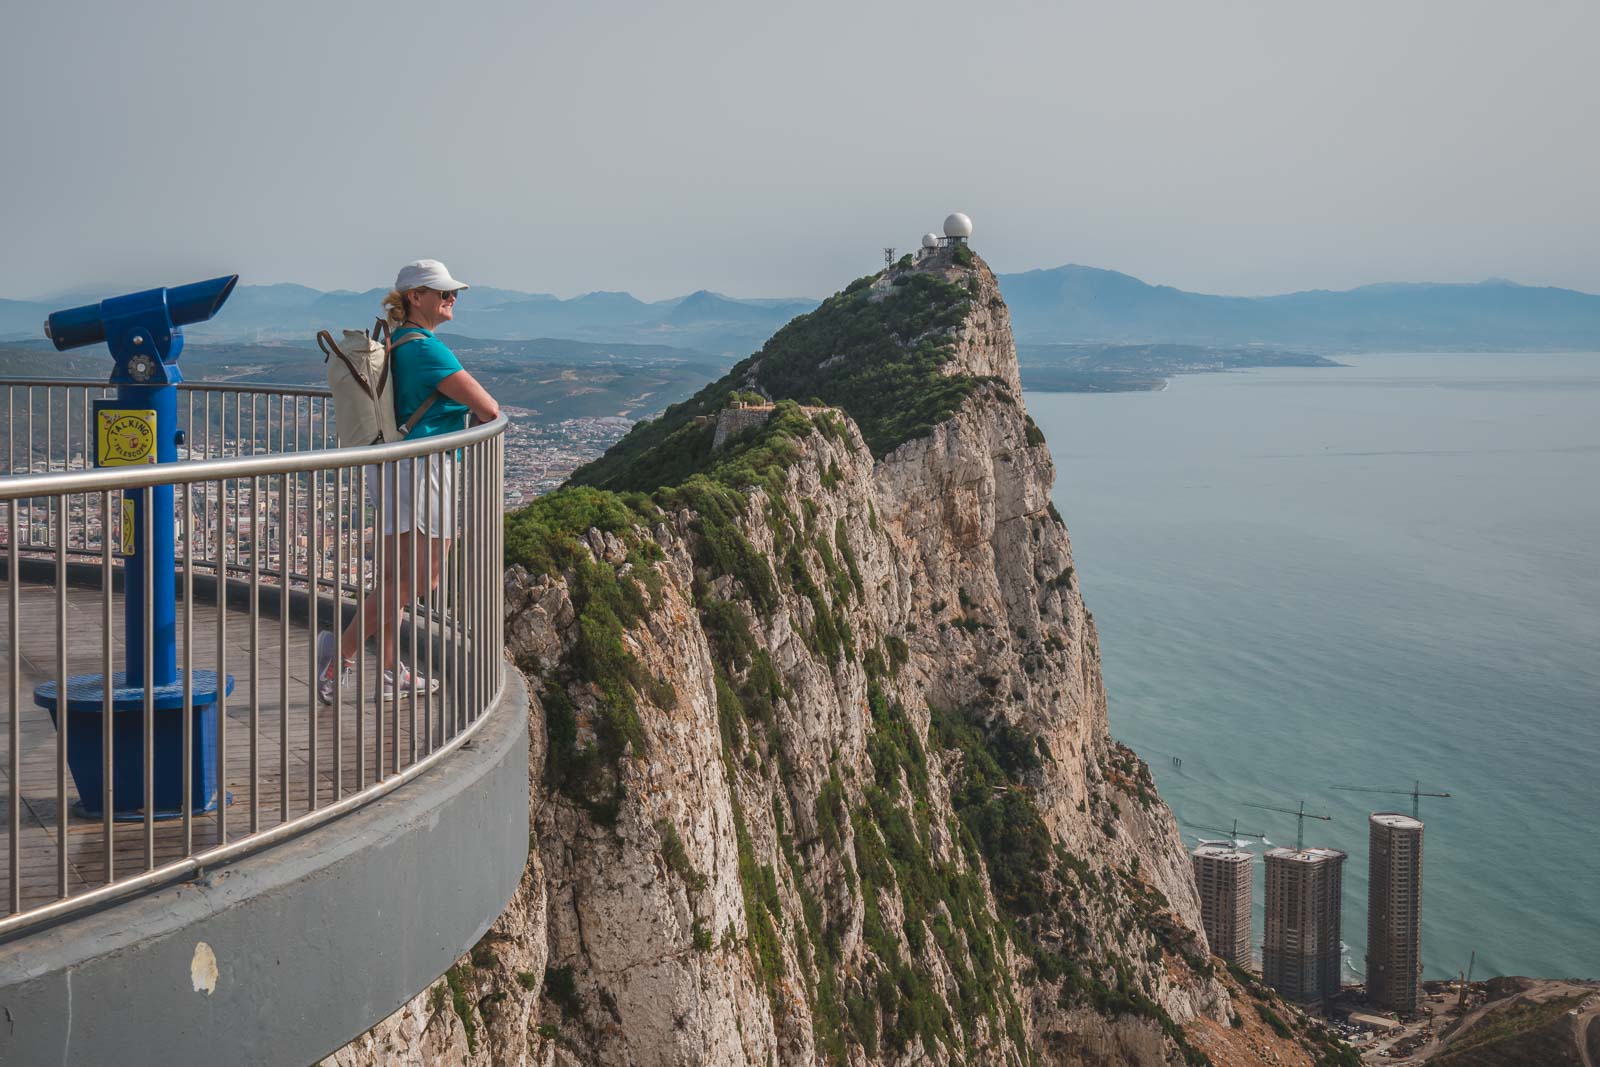 Things to do at the Rock of Gibraltar